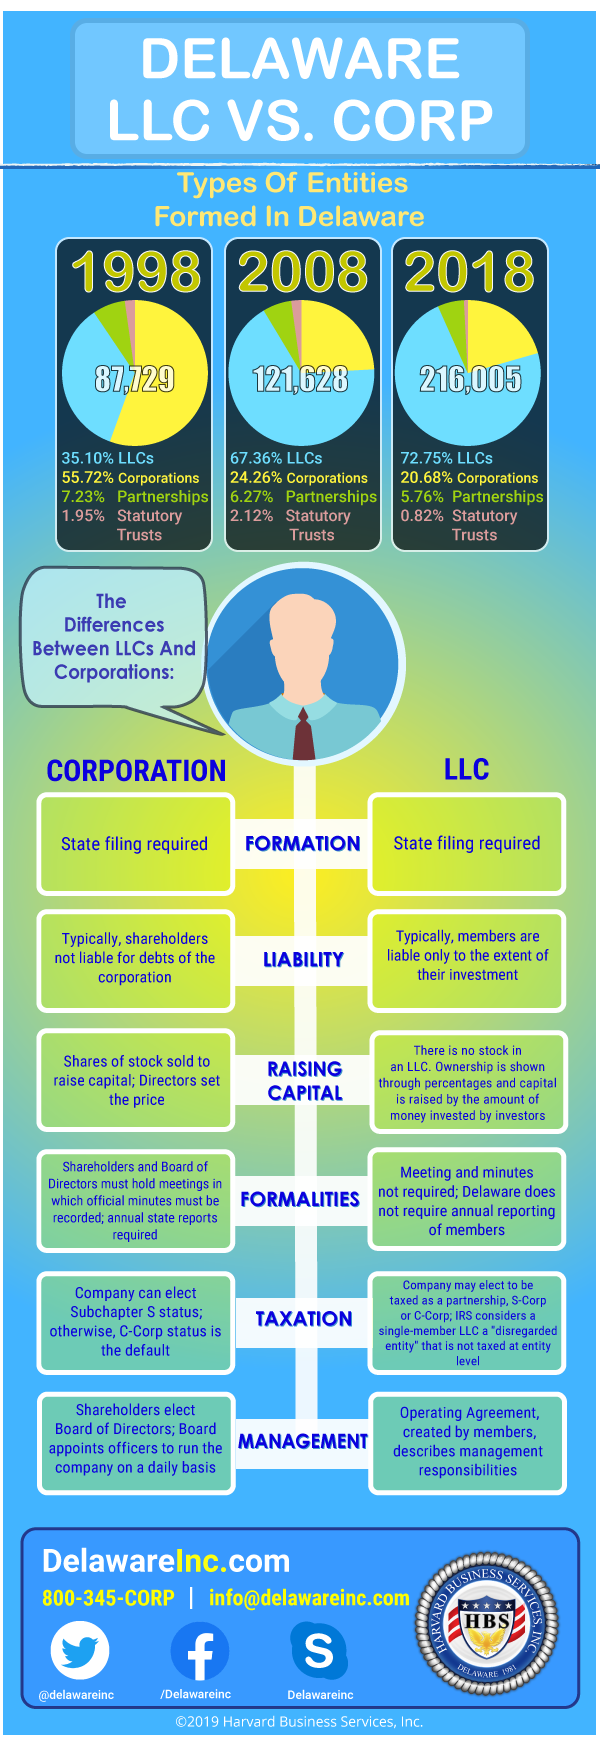 Llc Vs Corporation The Differences Harvard Business Services